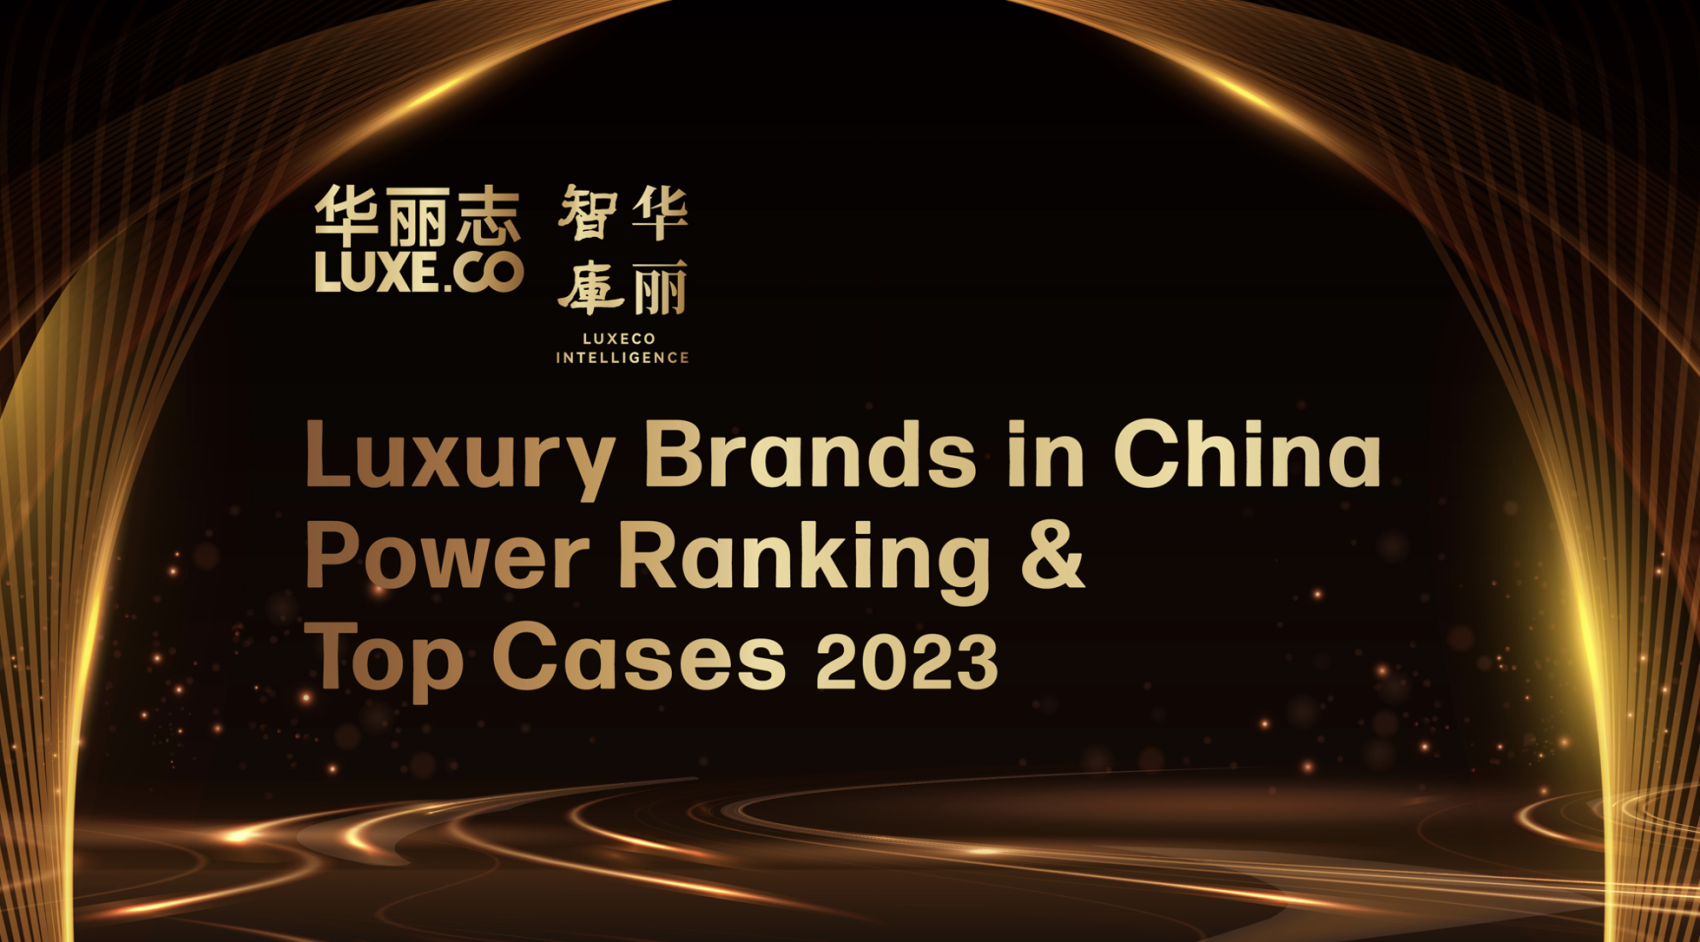 Exclusive丨Luxury Brands in China Power Ranking & Top Cases 2023